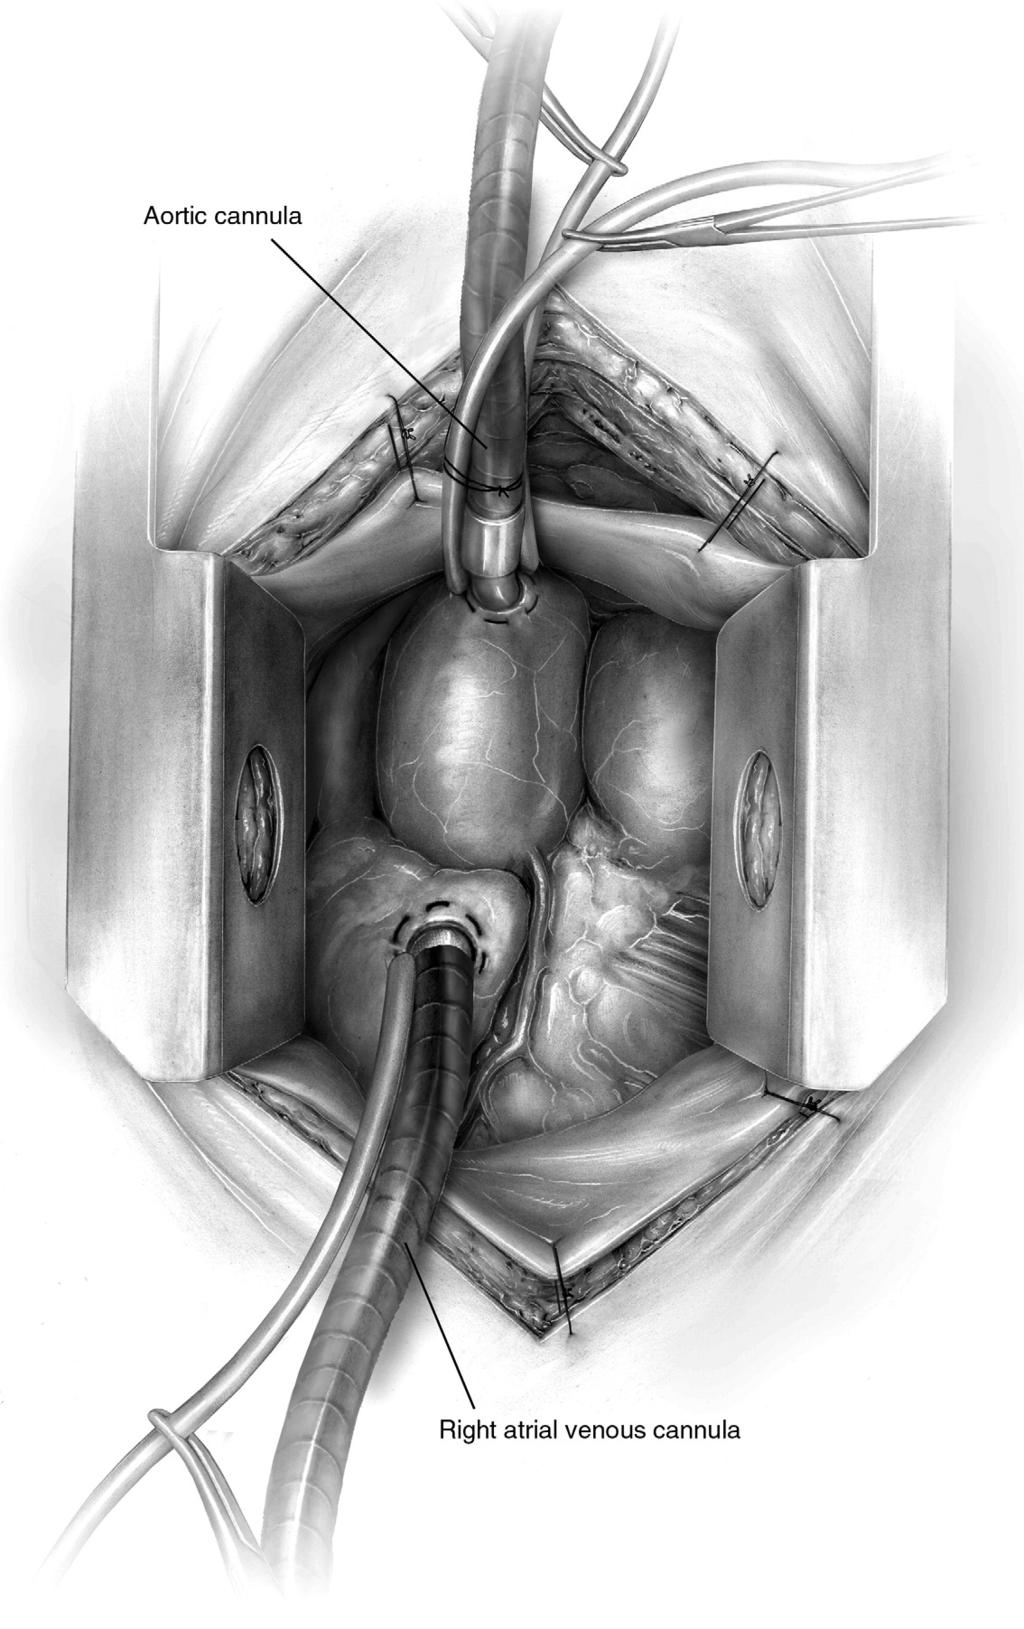 328 P.S. Shekar Figure 7 Cannulation is completed in the standard fashion using a standard aortic perfuser and a three-stage right atrial venous cannula.